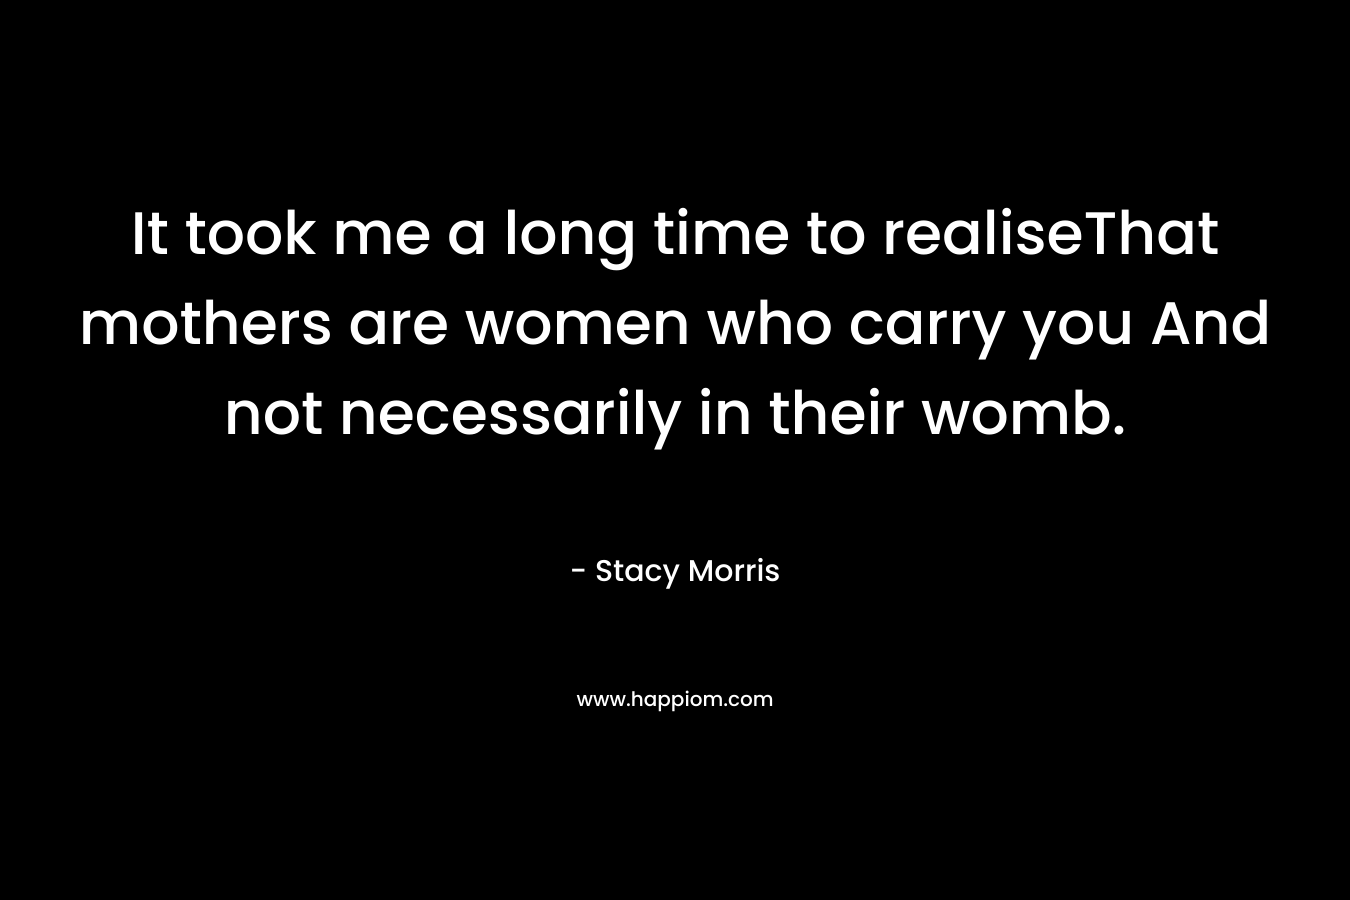 It took me a long time to realiseThat mothers are women who carry you And not necessarily in their womb. – Stacy Morris